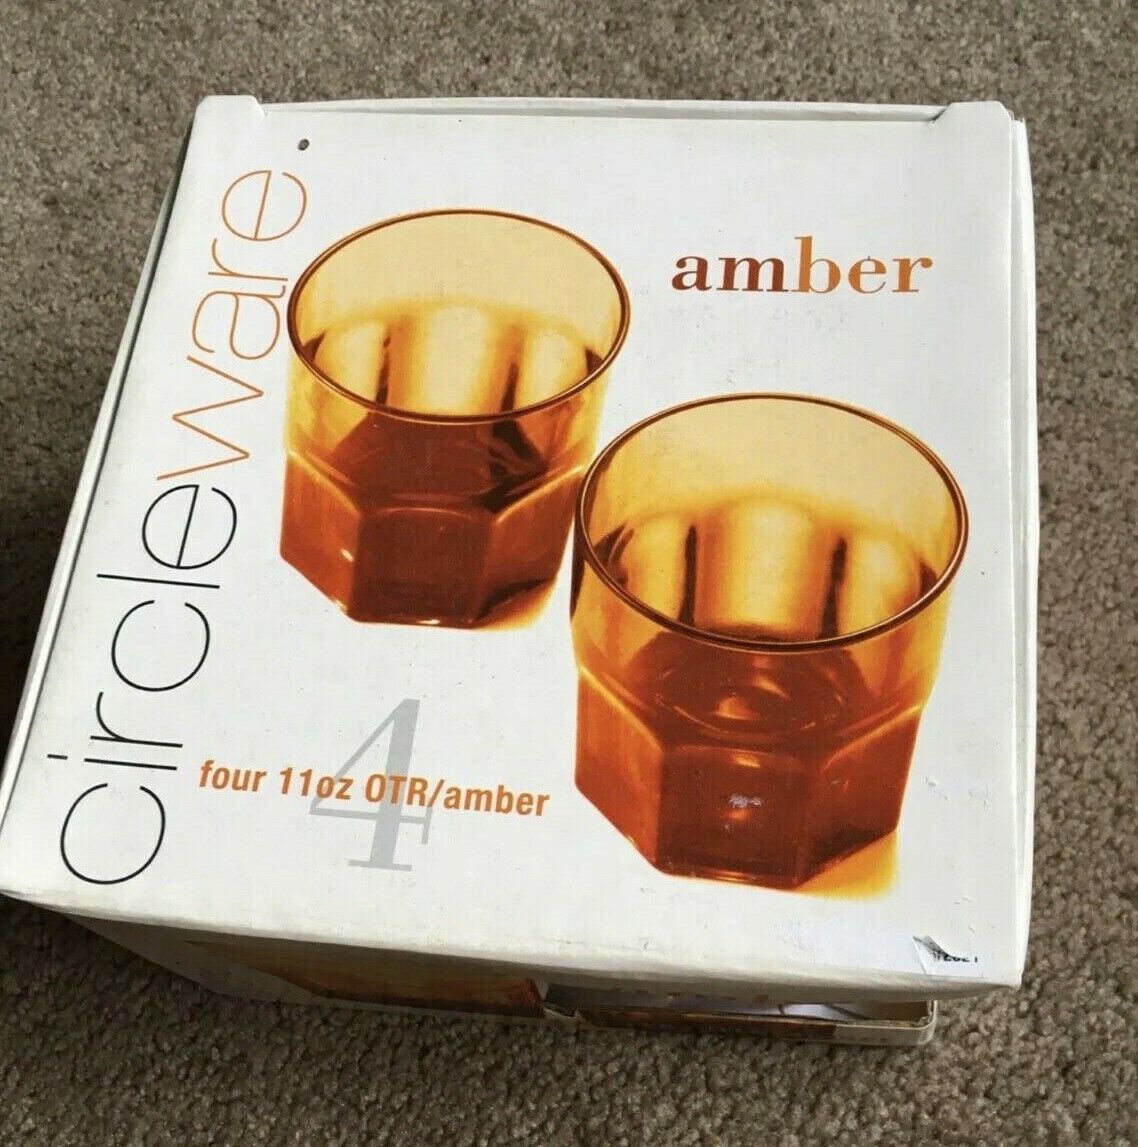 vintage circleware amber glasses In box, Old fashion glasses 